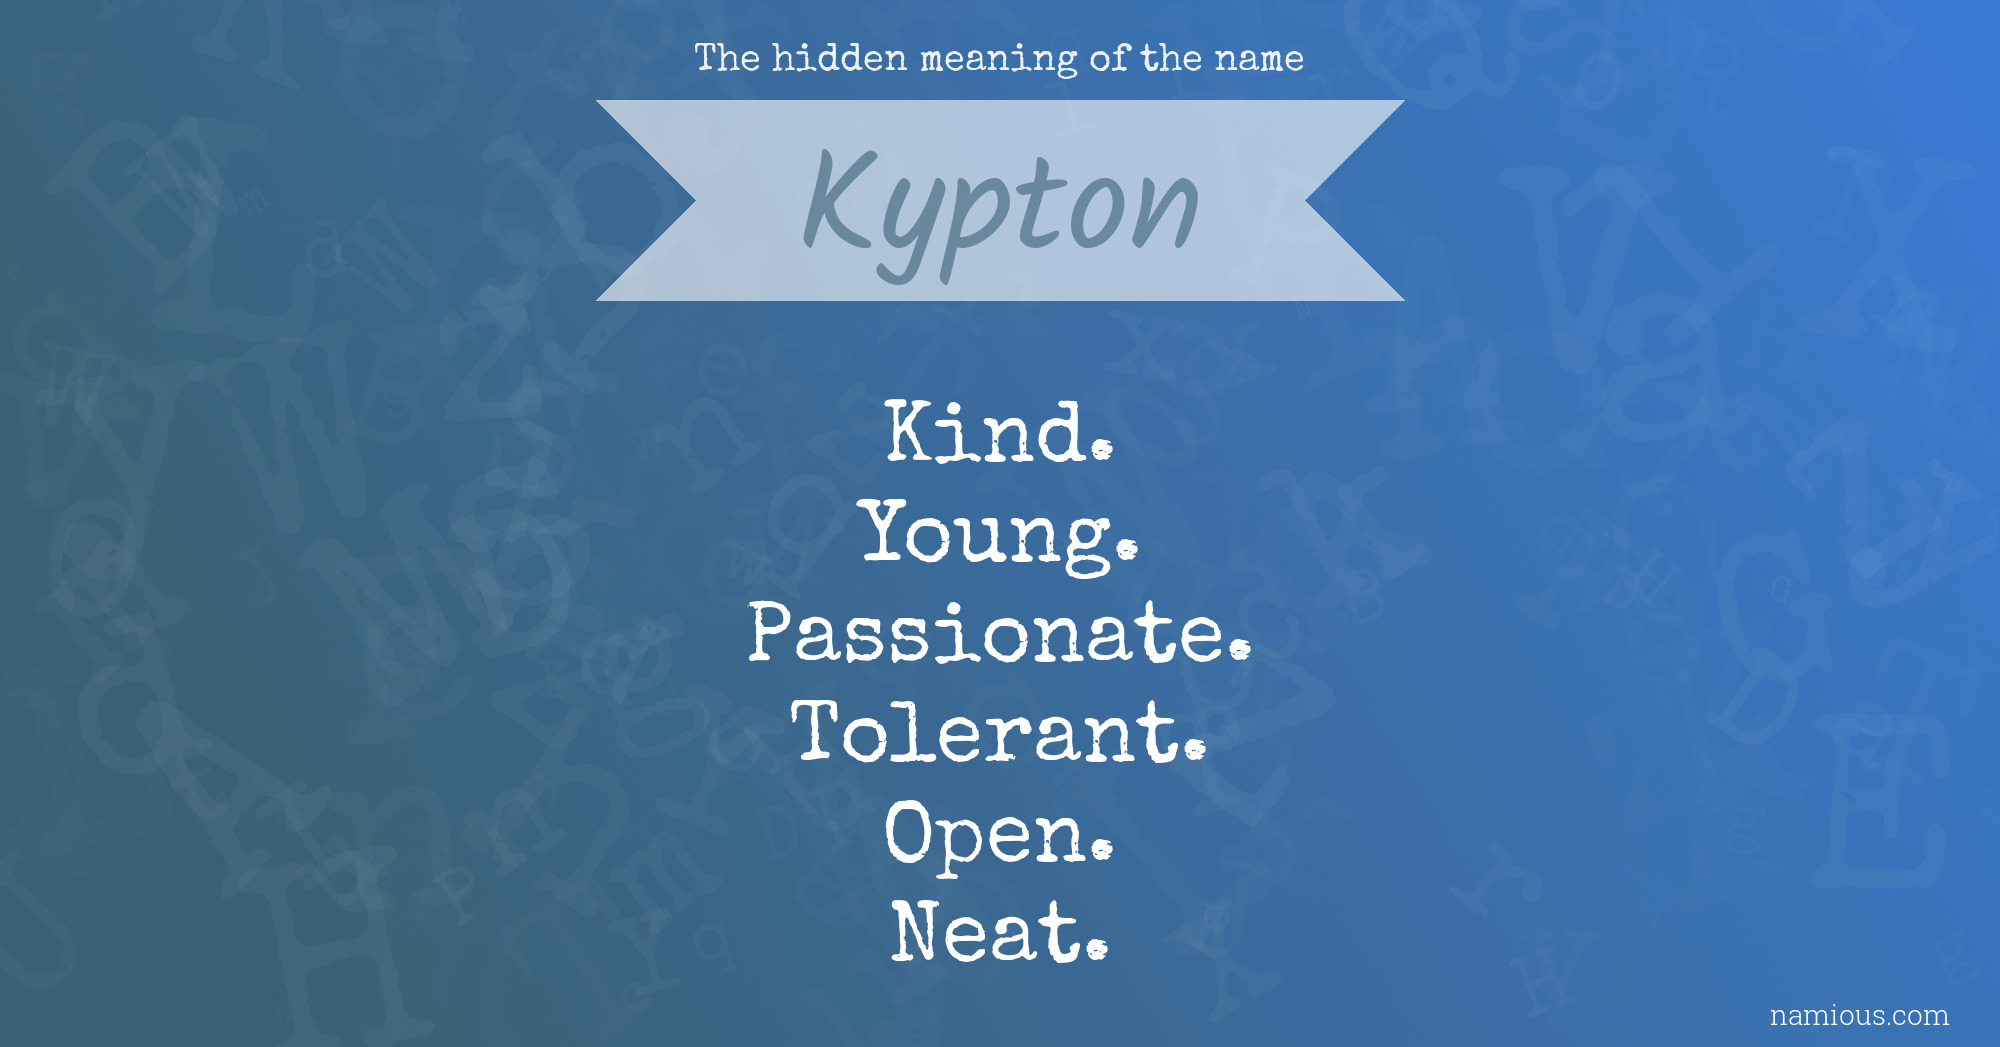 The hidden meaning of the name Kypton